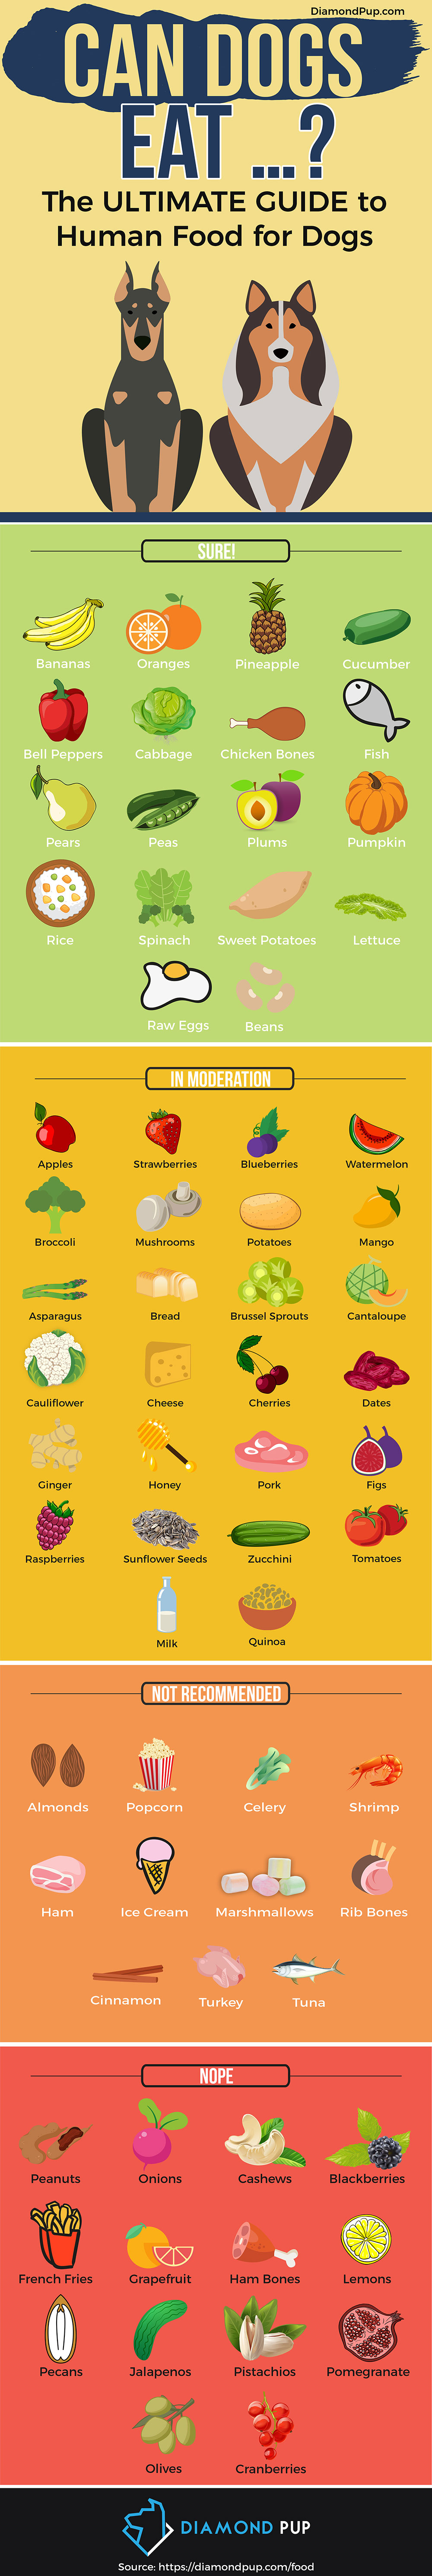 human food for dogs infographic